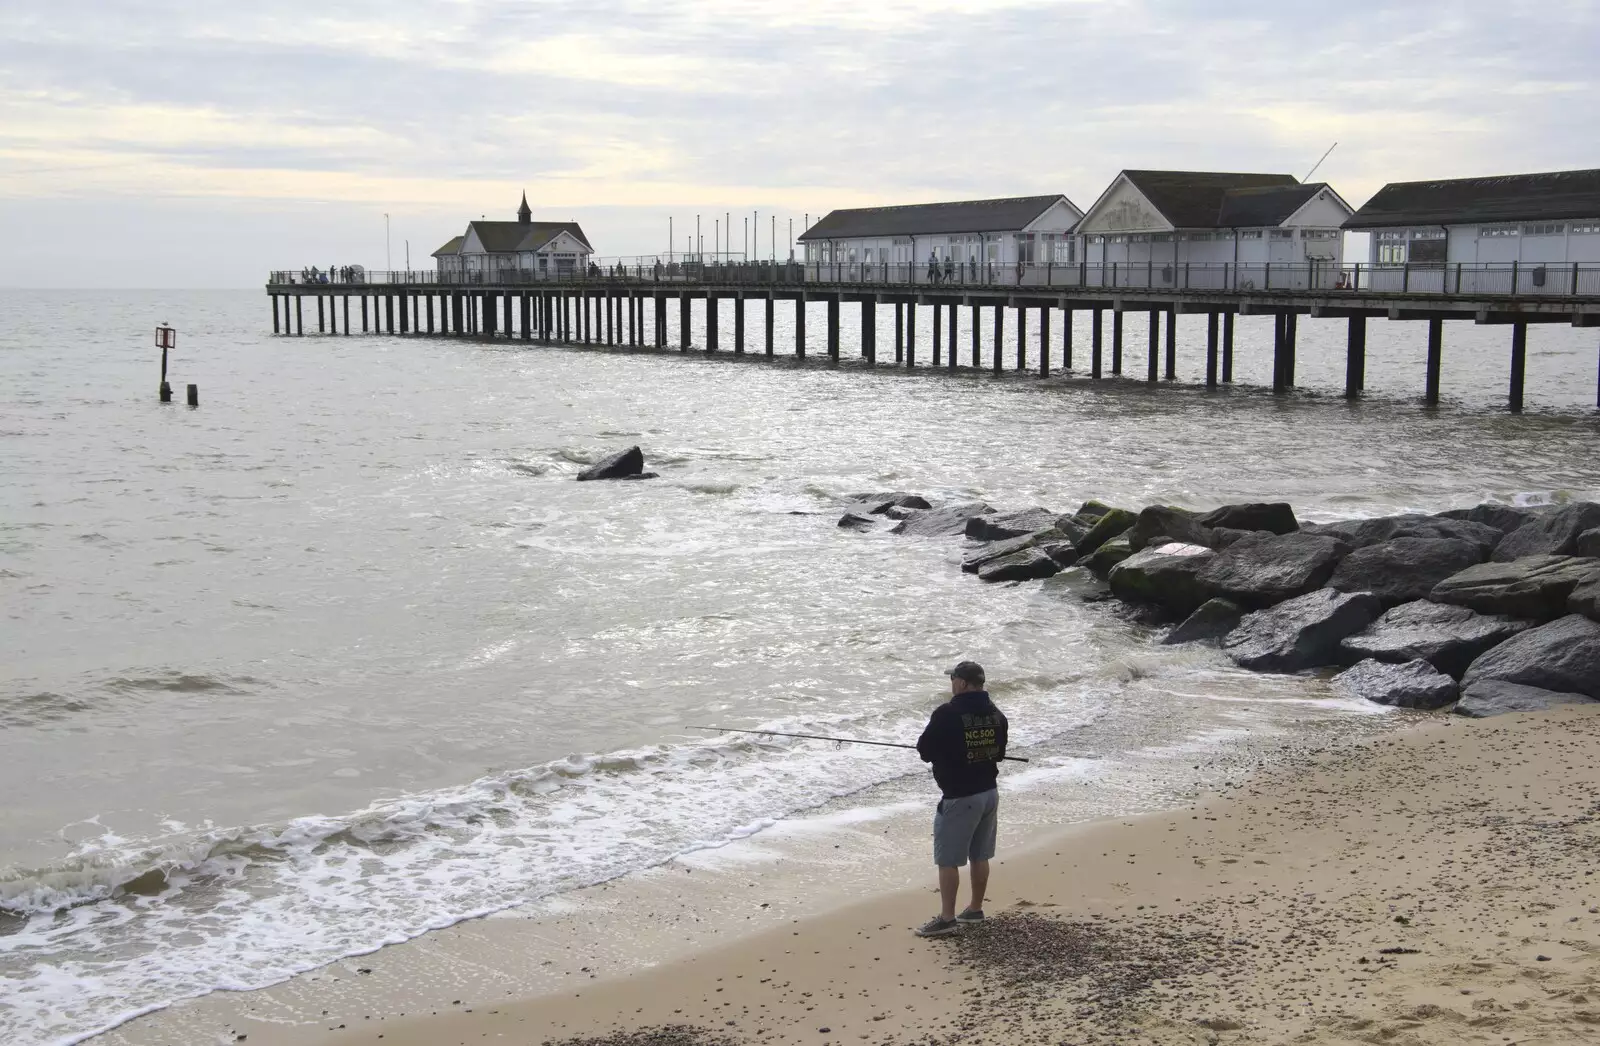 Some dude does a bit of fishing by the pier, from The Waverley Paddle Steamer at Southwold Pier, Suffolk - 27th September 2023